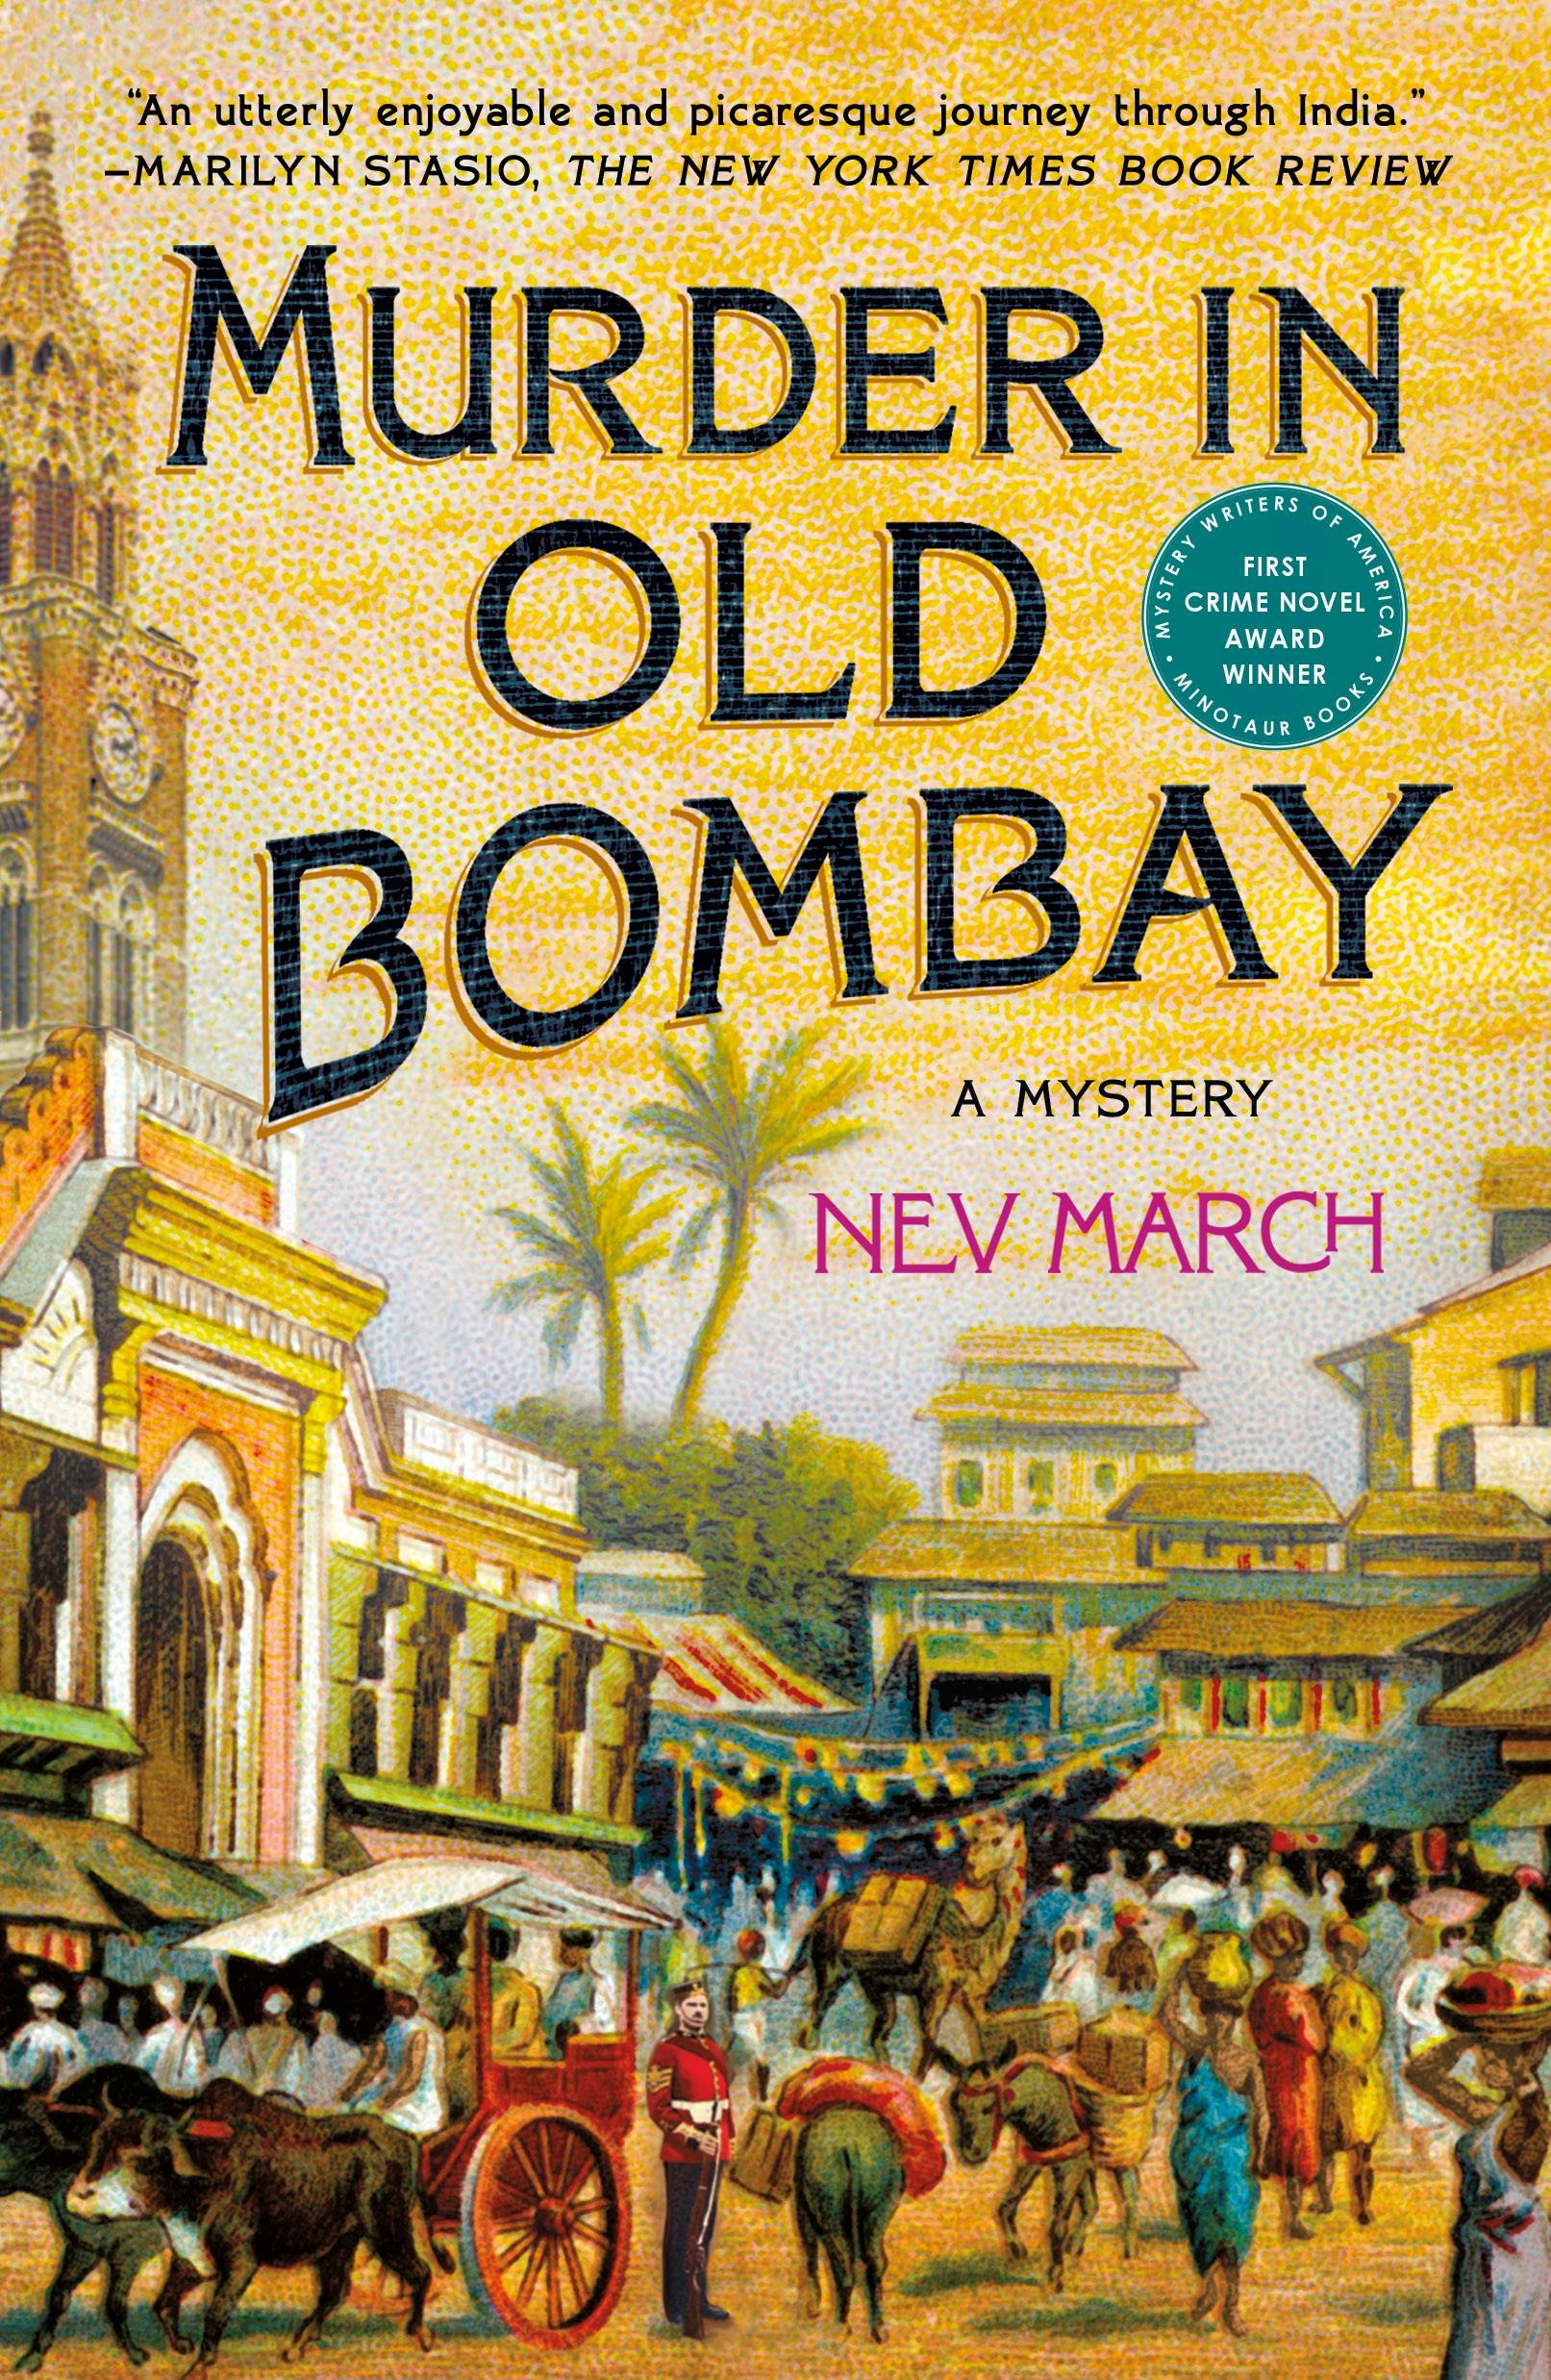 Image of Murder in Old Bombay